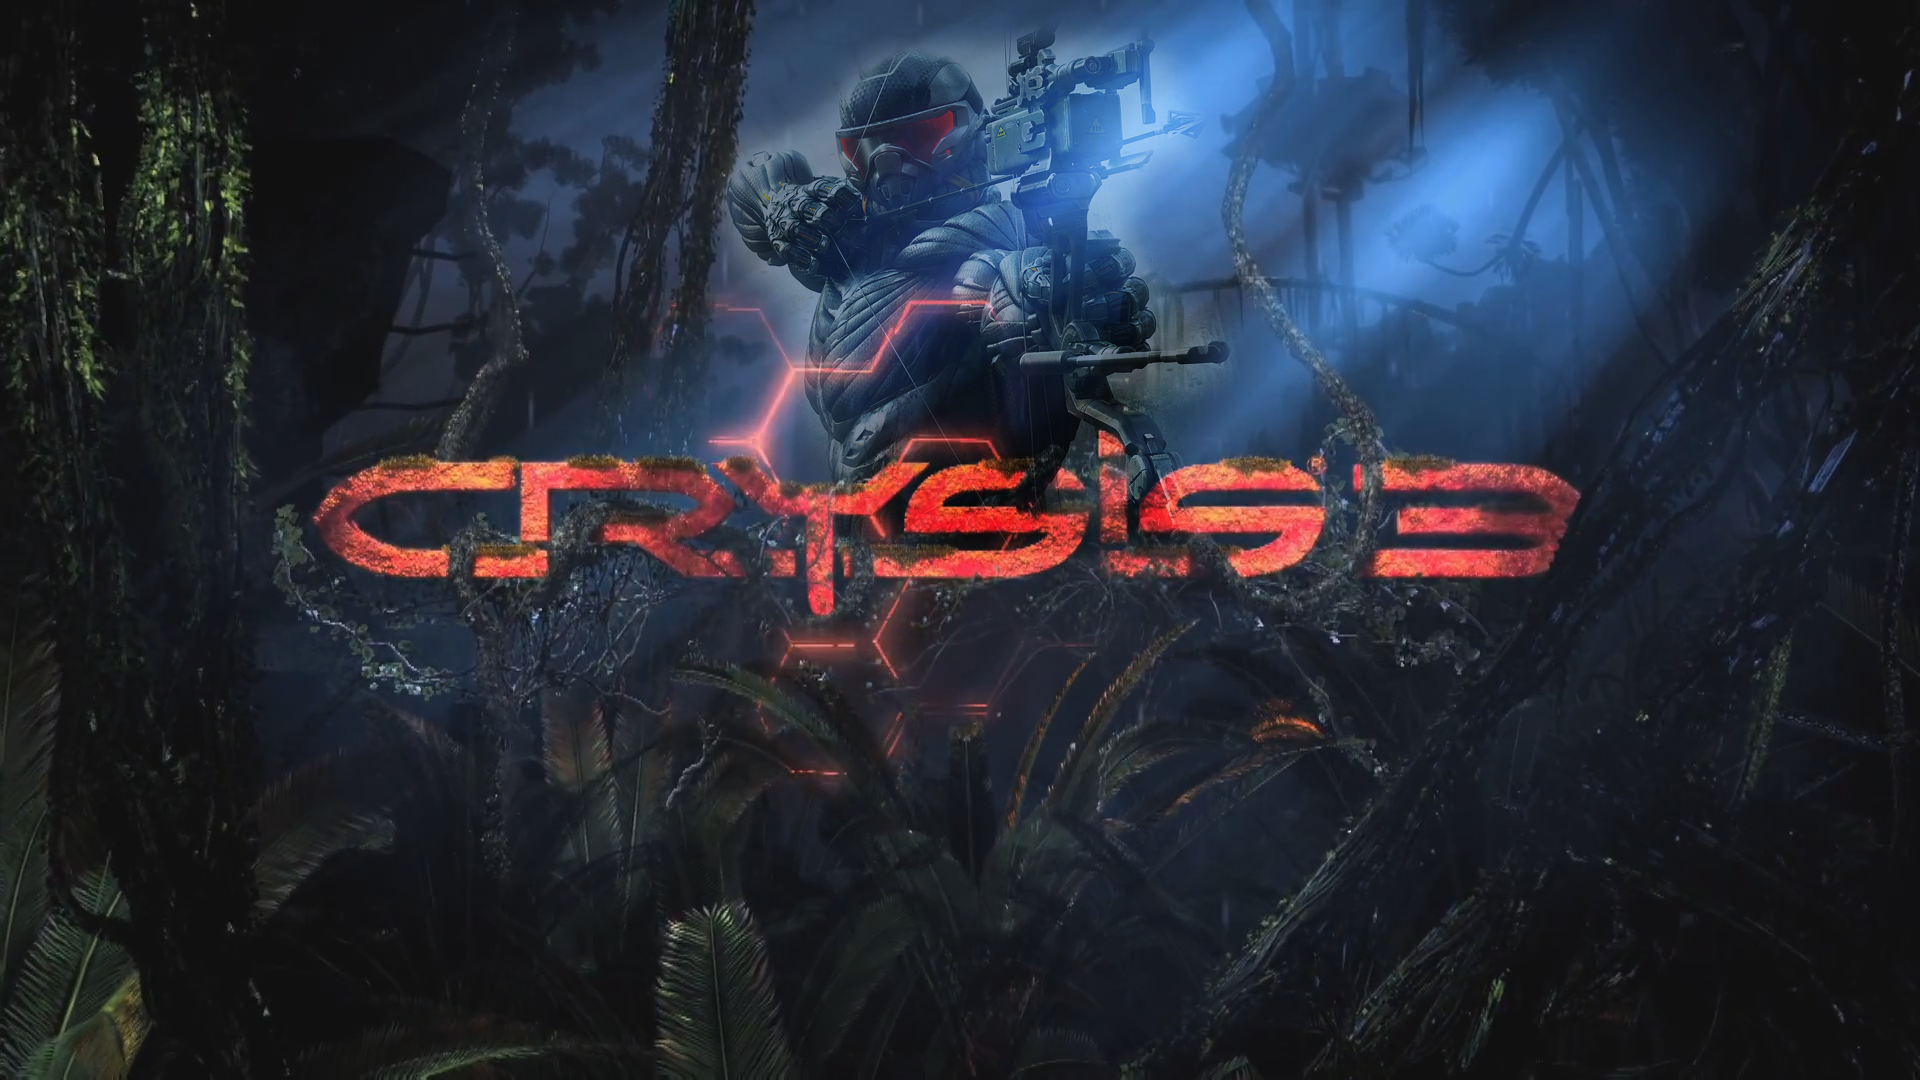 crysis 3 patch 1.4 download